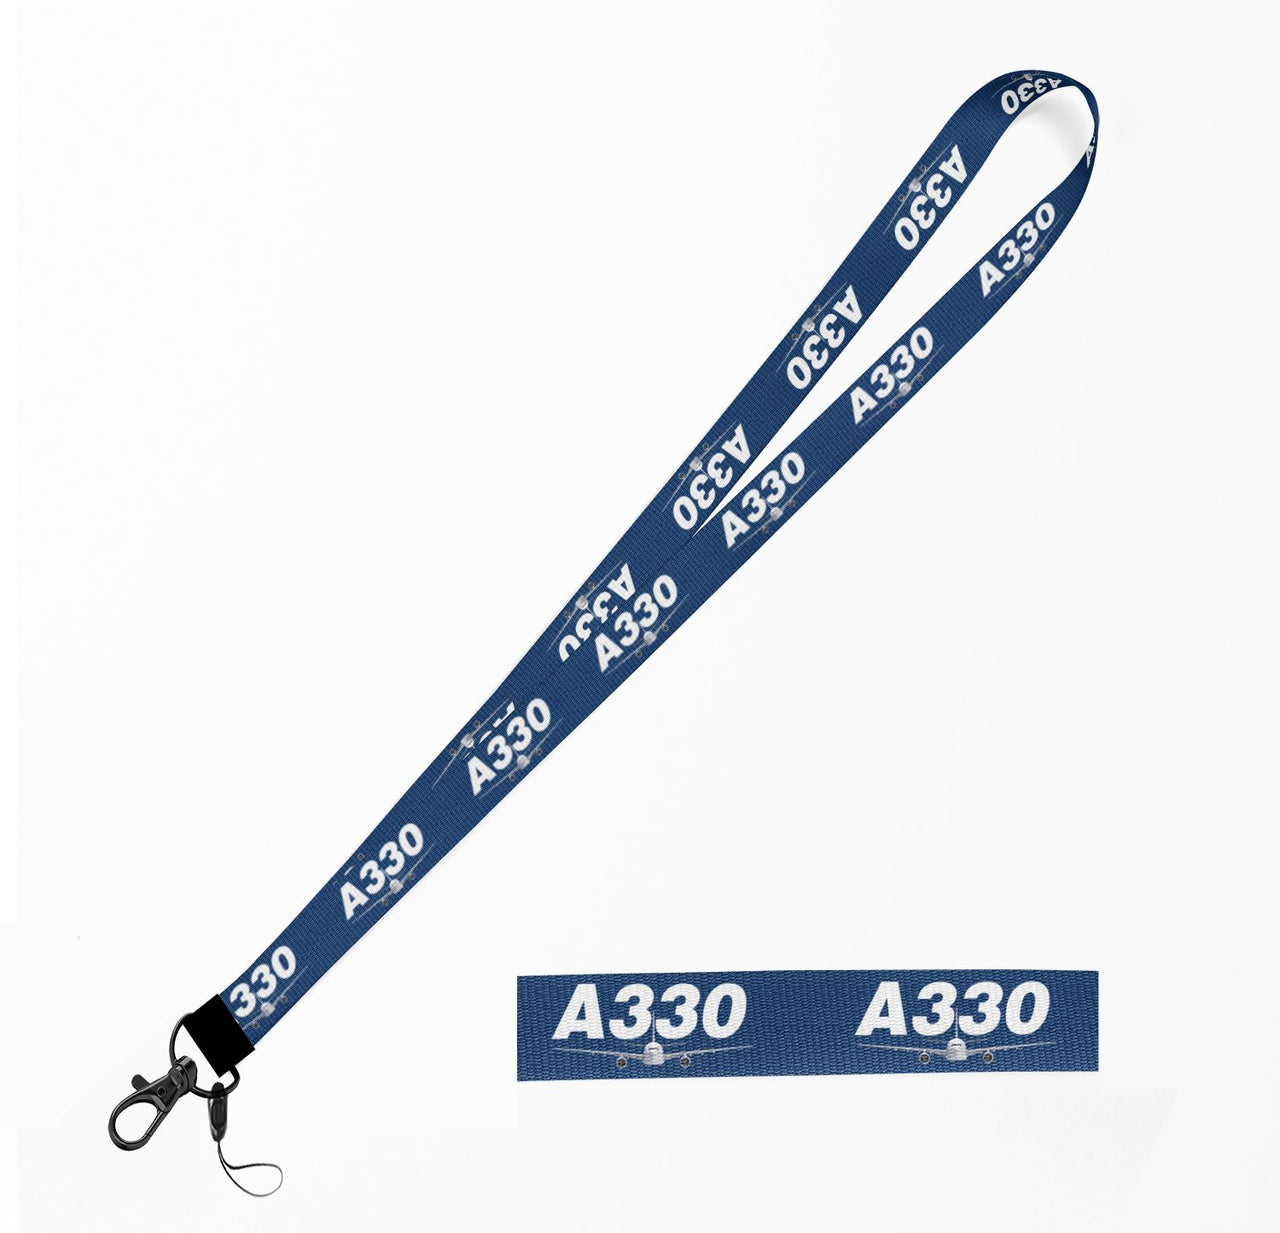 Super Airbus A330 Designed Lanyard & ID Holders